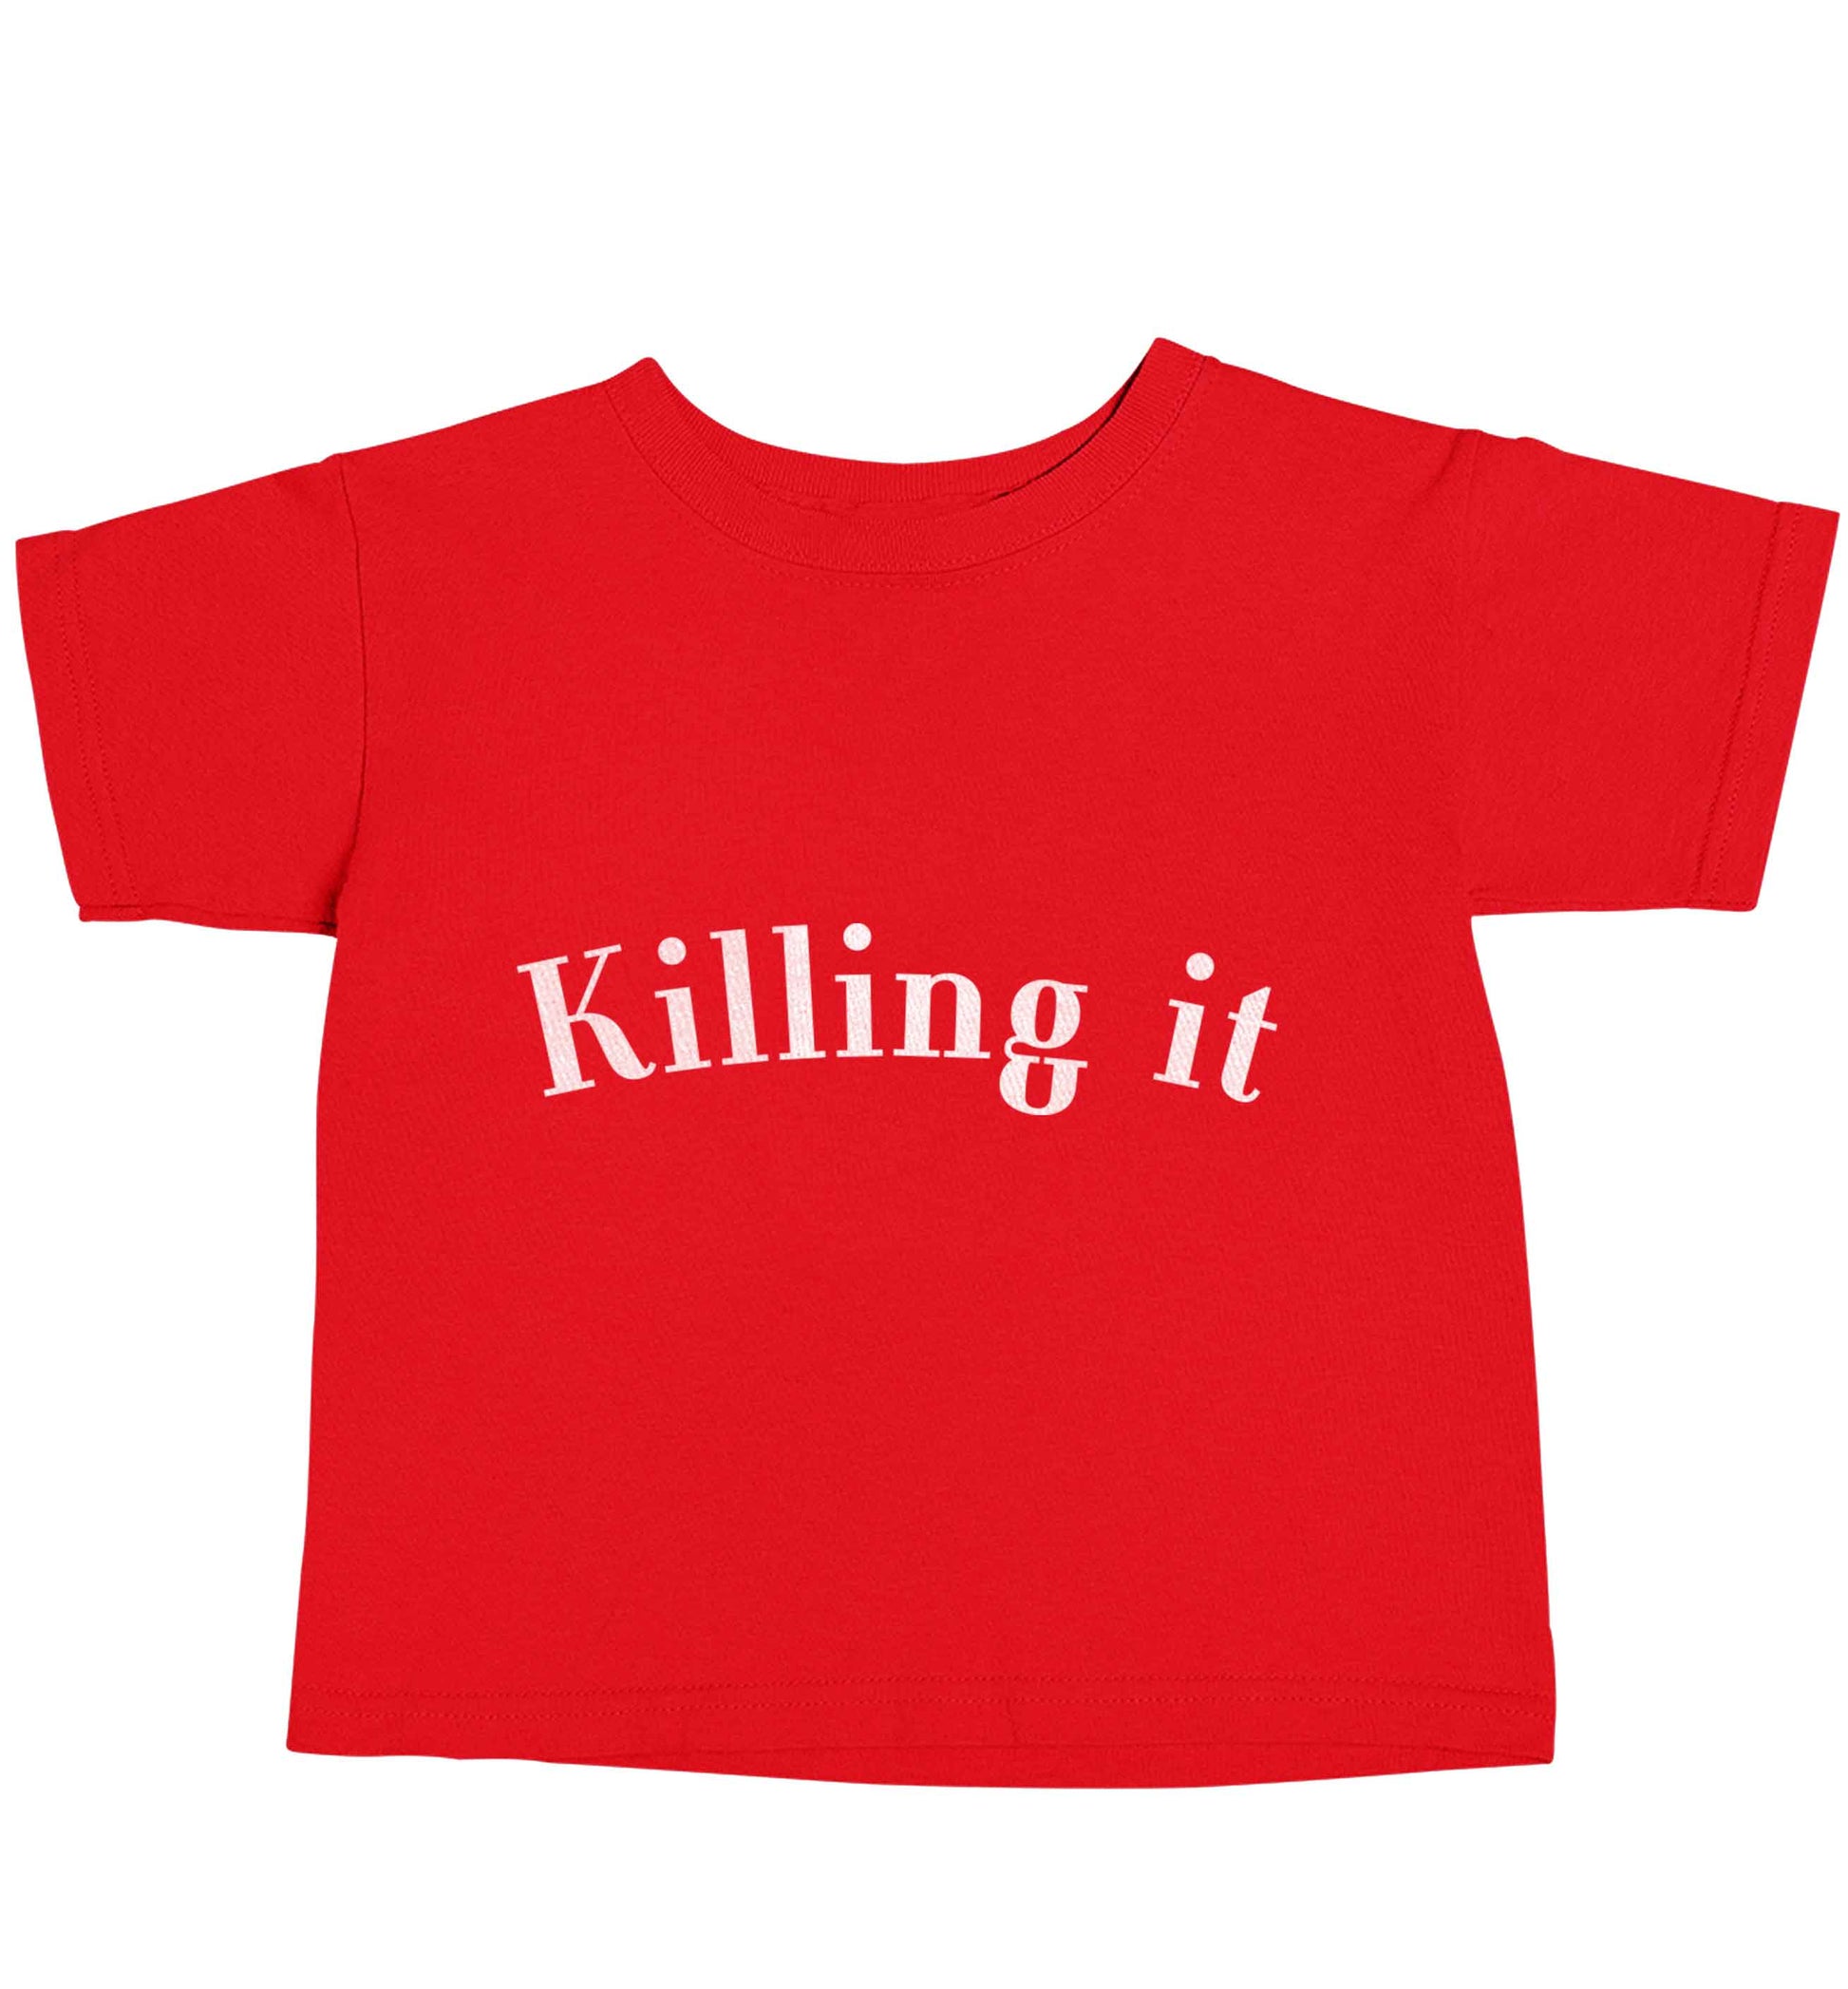 Killing it red baby toddler Tshirt 2 Years